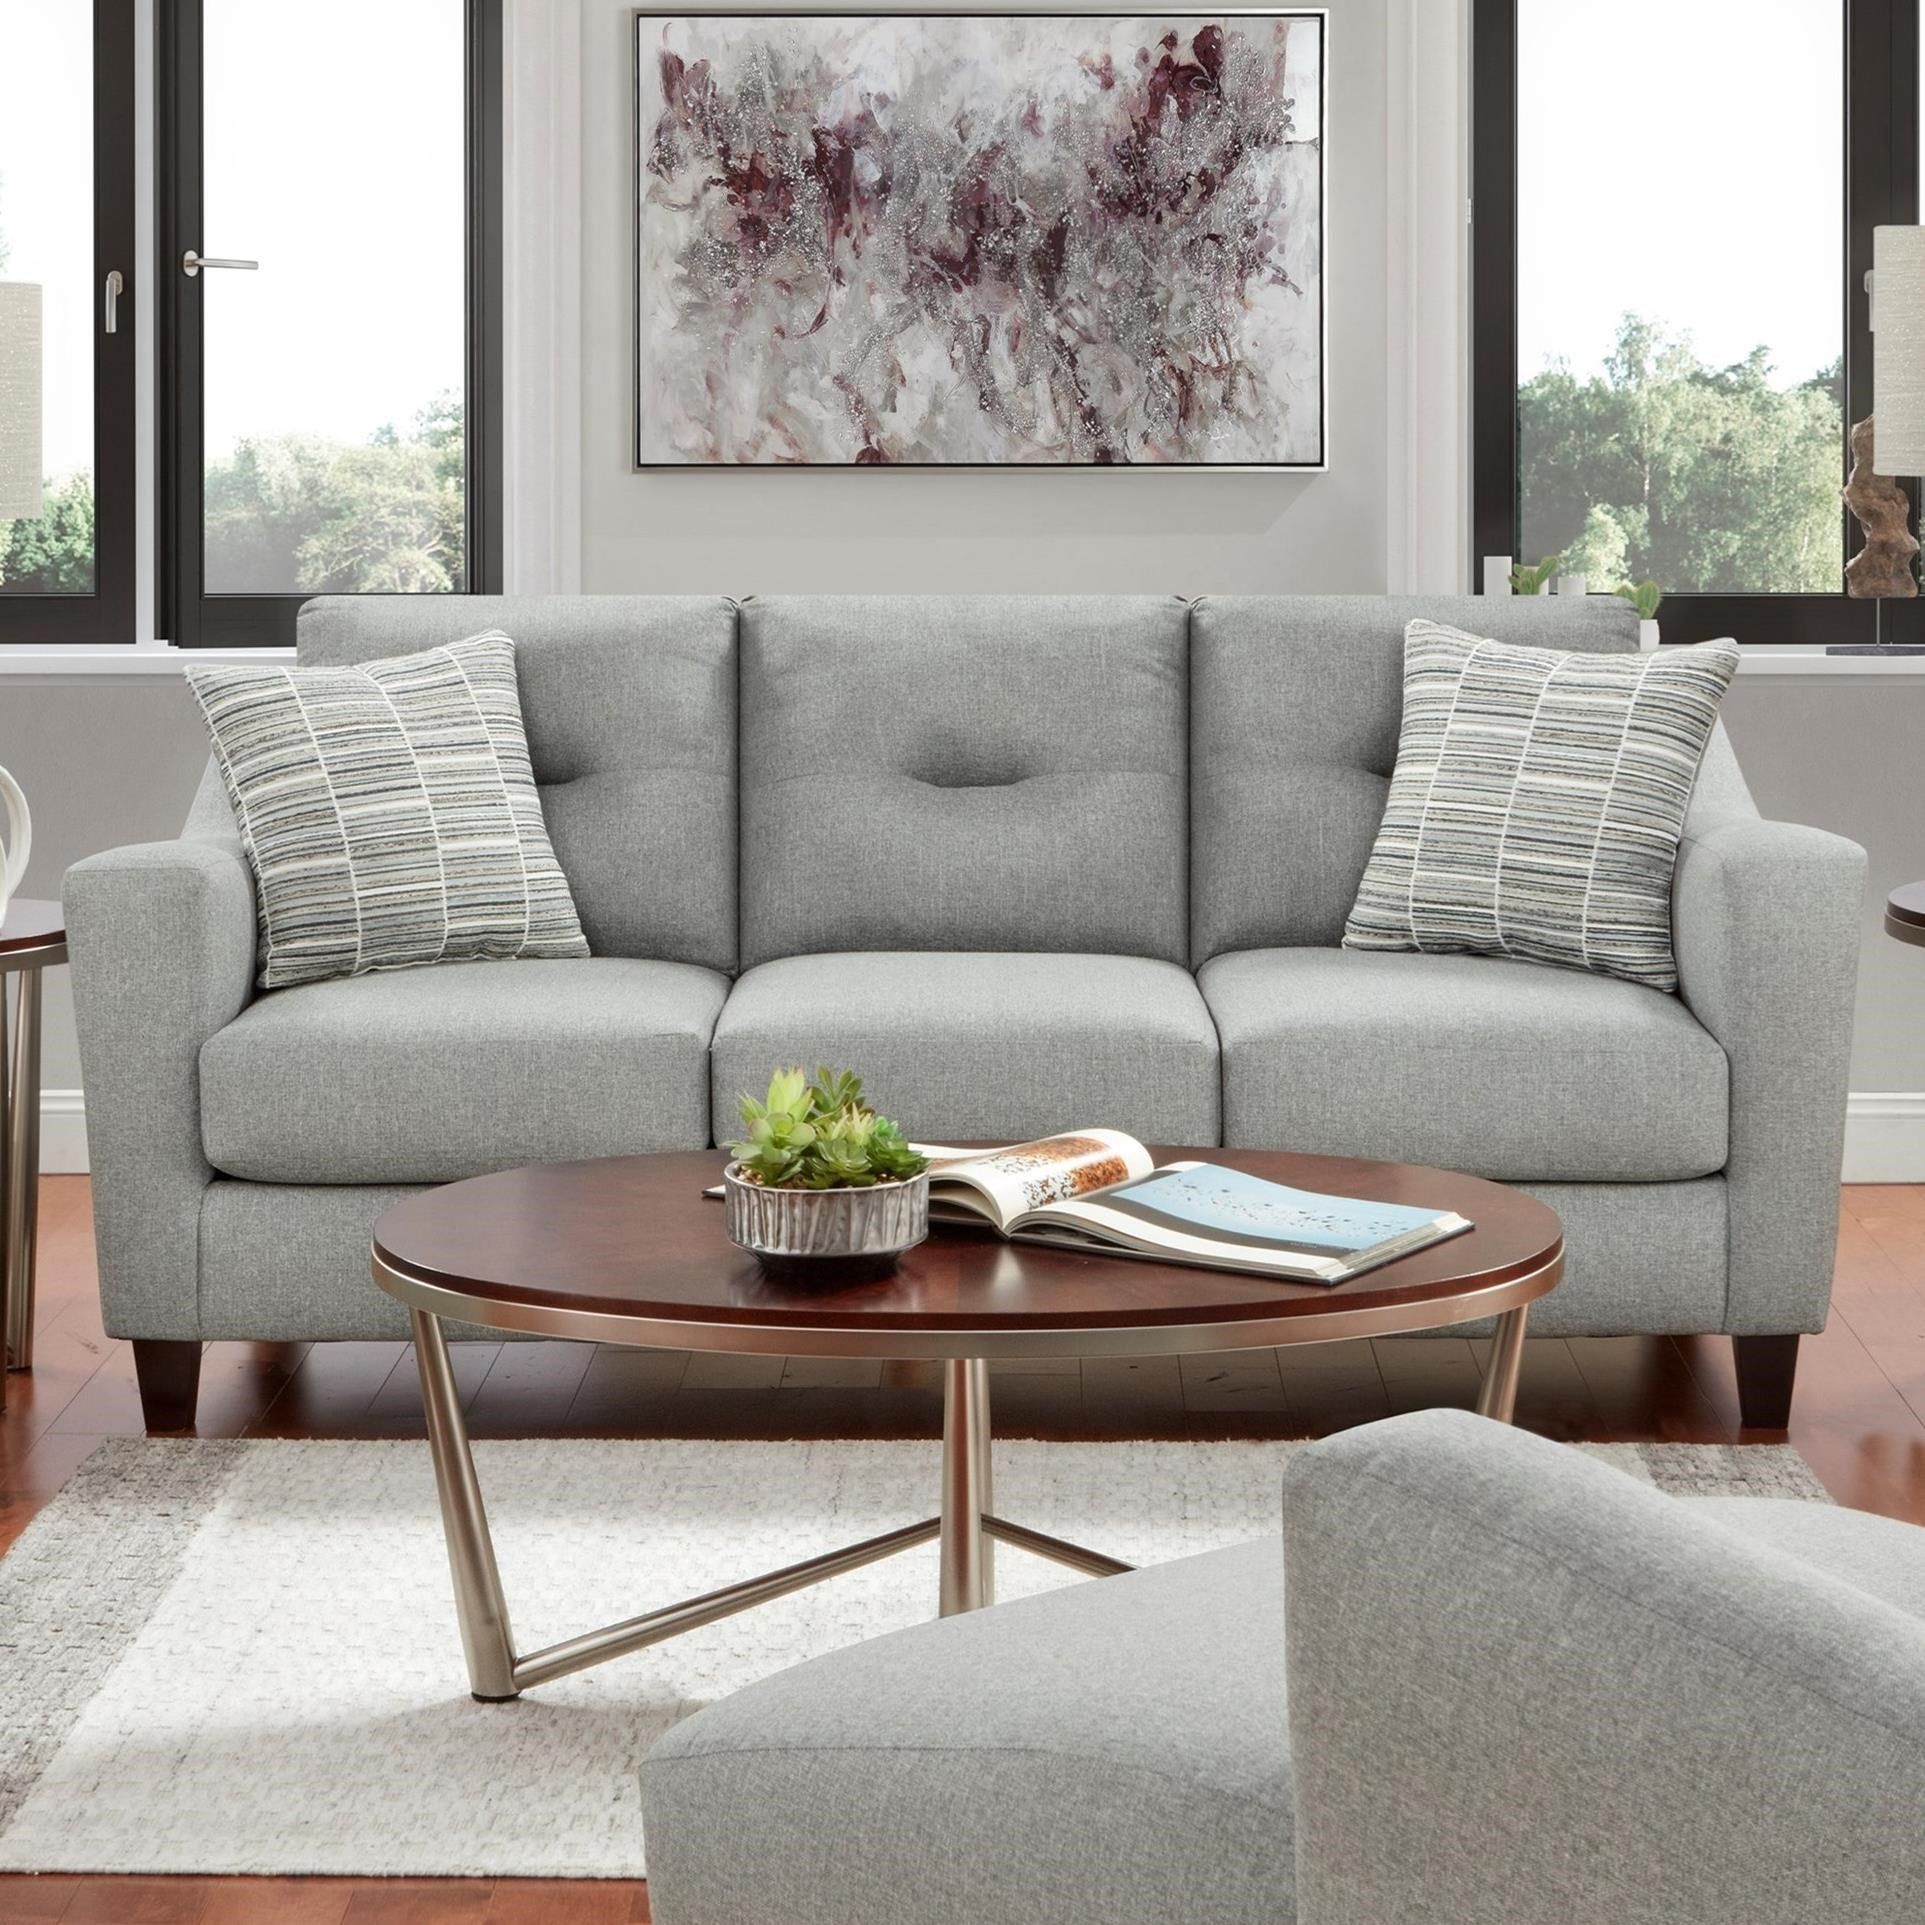 Fusion Furniture 8210 Tnt Charcoal Sofa | Howell Furniture | Uph In Light Charcoal Linen Sofas (View 20 of 20)